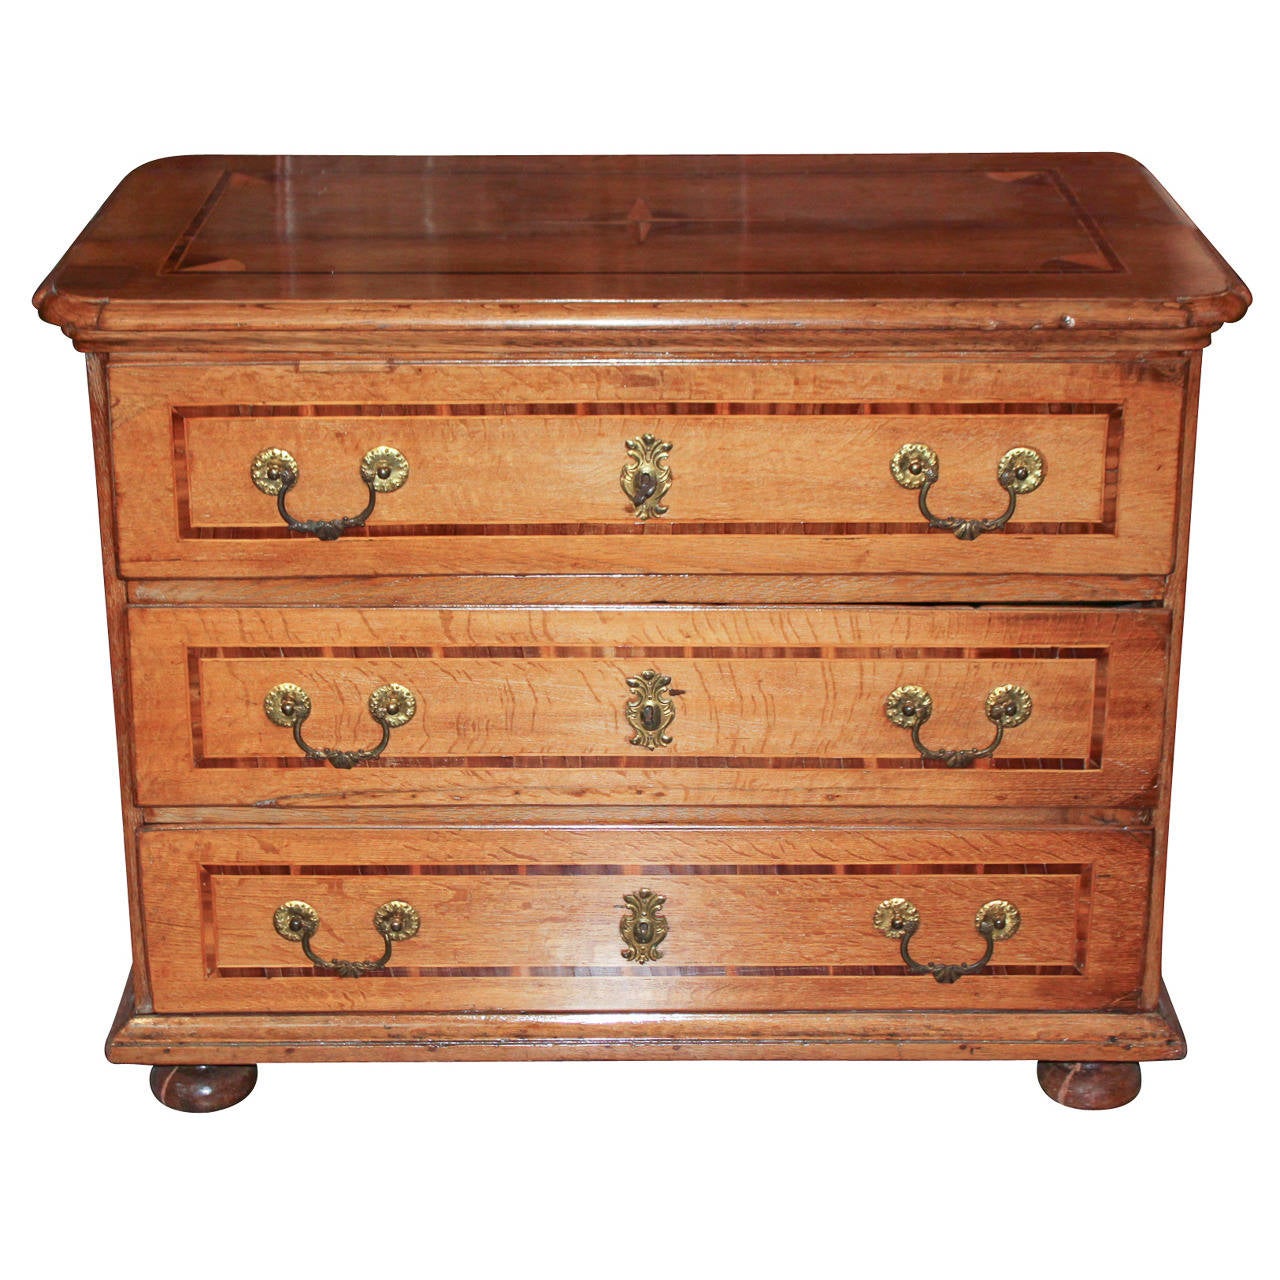 Sensational German oak 3-drawer commode. Having lovely inlays on all sides of piece and each drawer front. With gilt bronze hardware and resting on bunn feet.